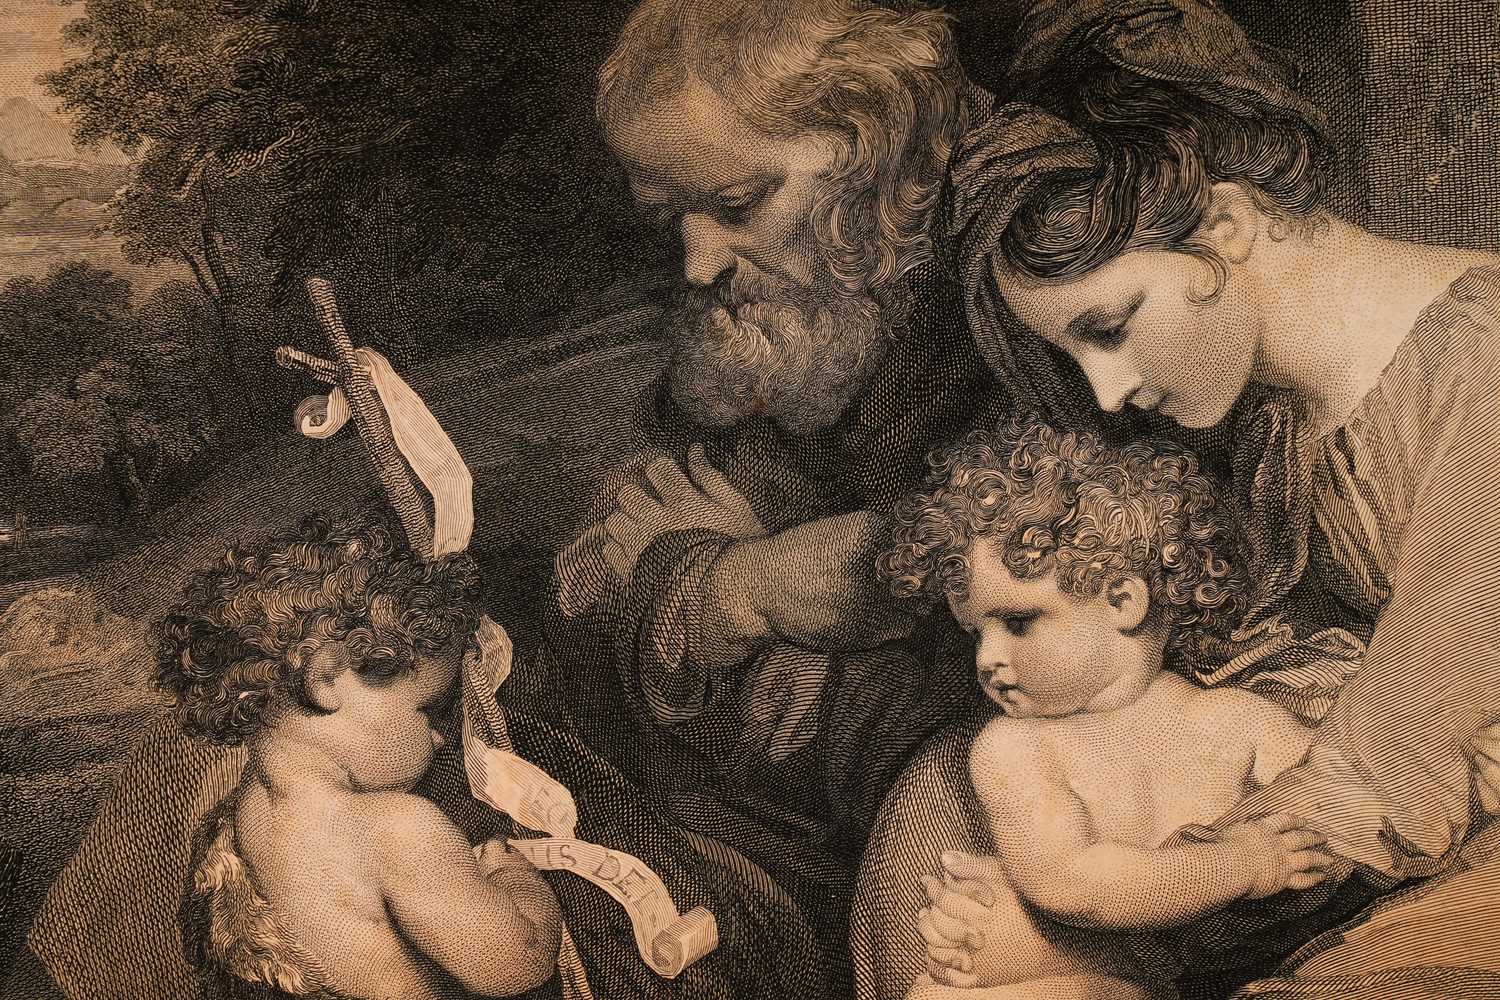 After Sir Joshua Reynolds - The Holy Family | line engraving - Image 4 of 4